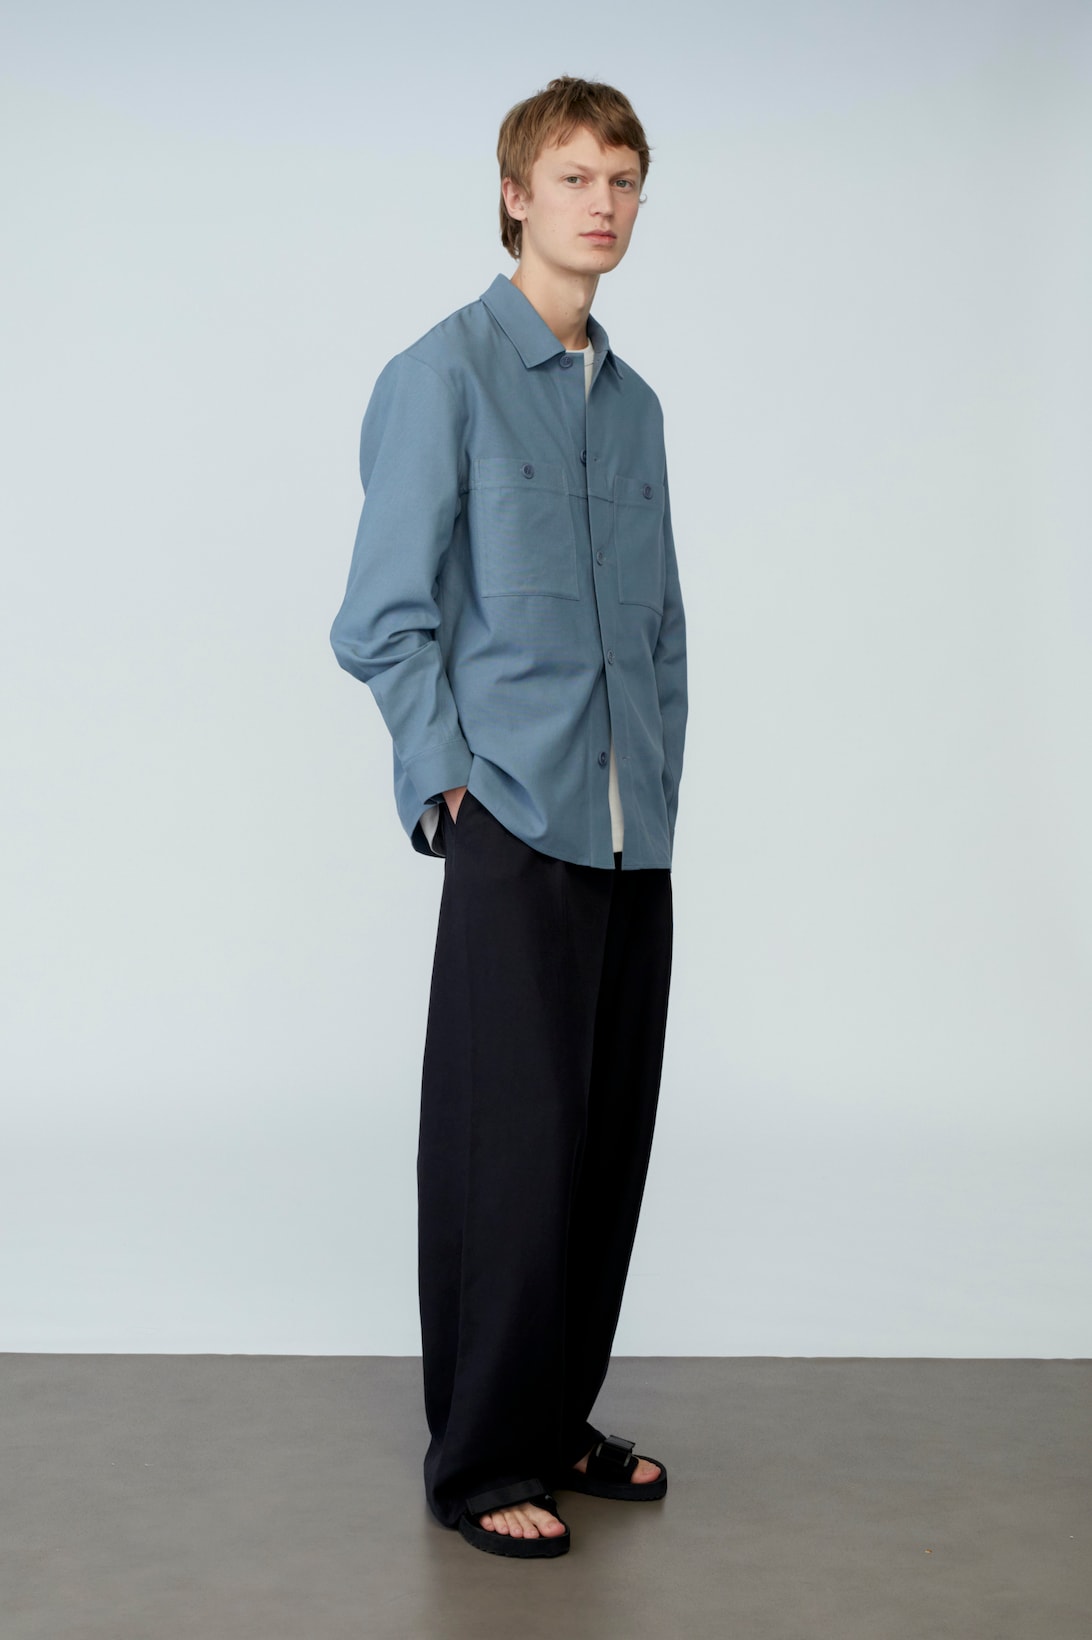 cos spring menswear summer collection lookbook blue shirt pants sandals